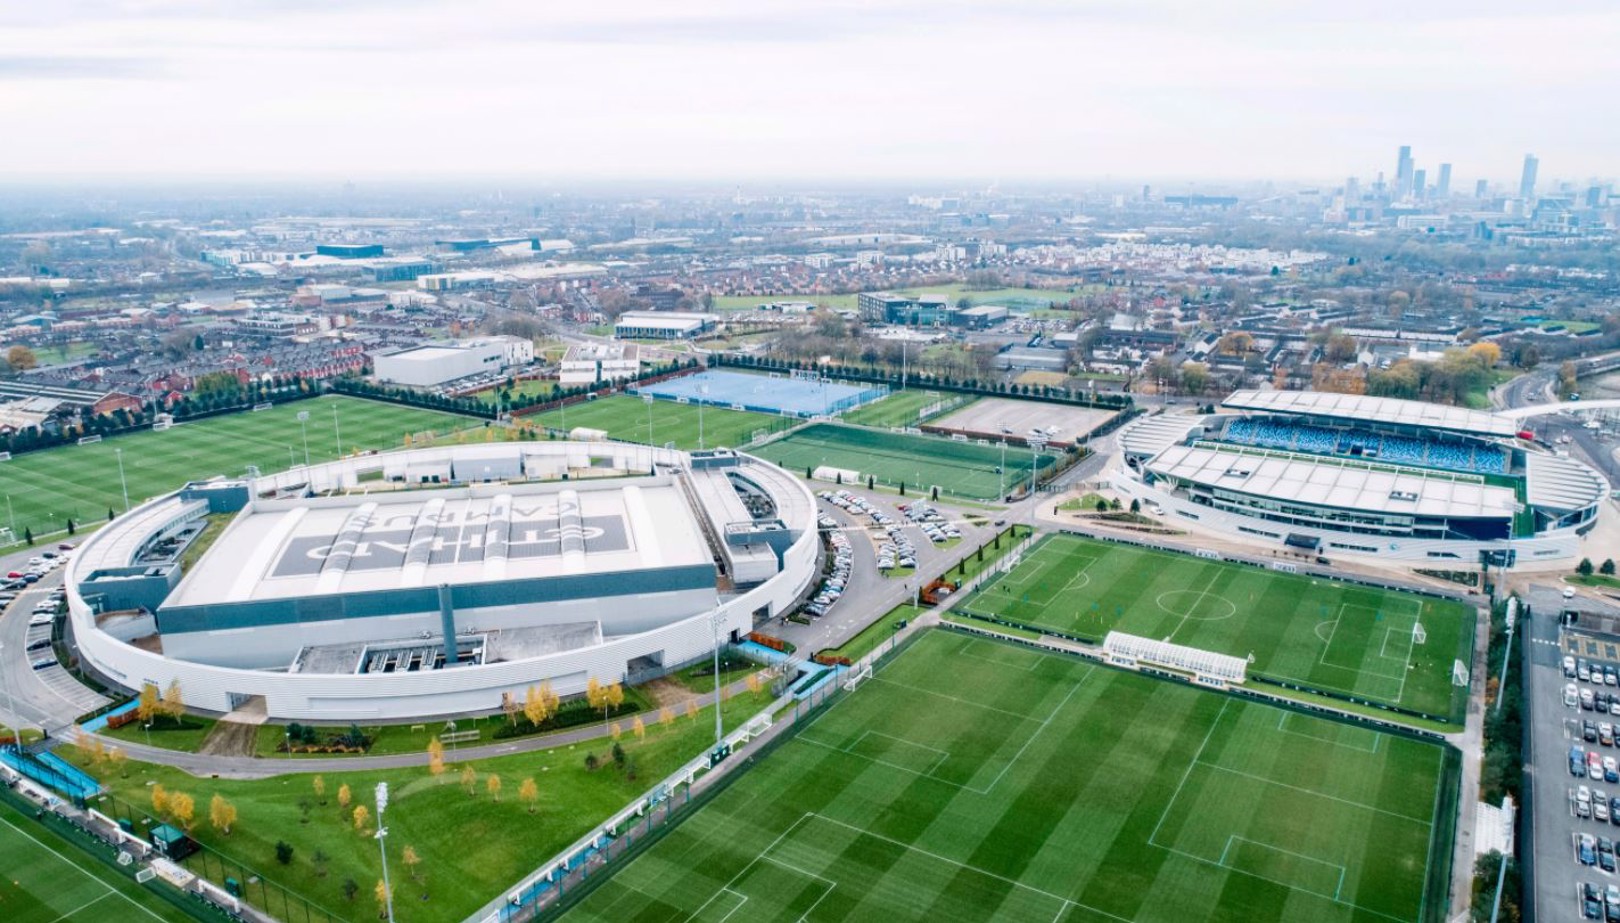 City Football Schools: Learn and play at the City Football Academy